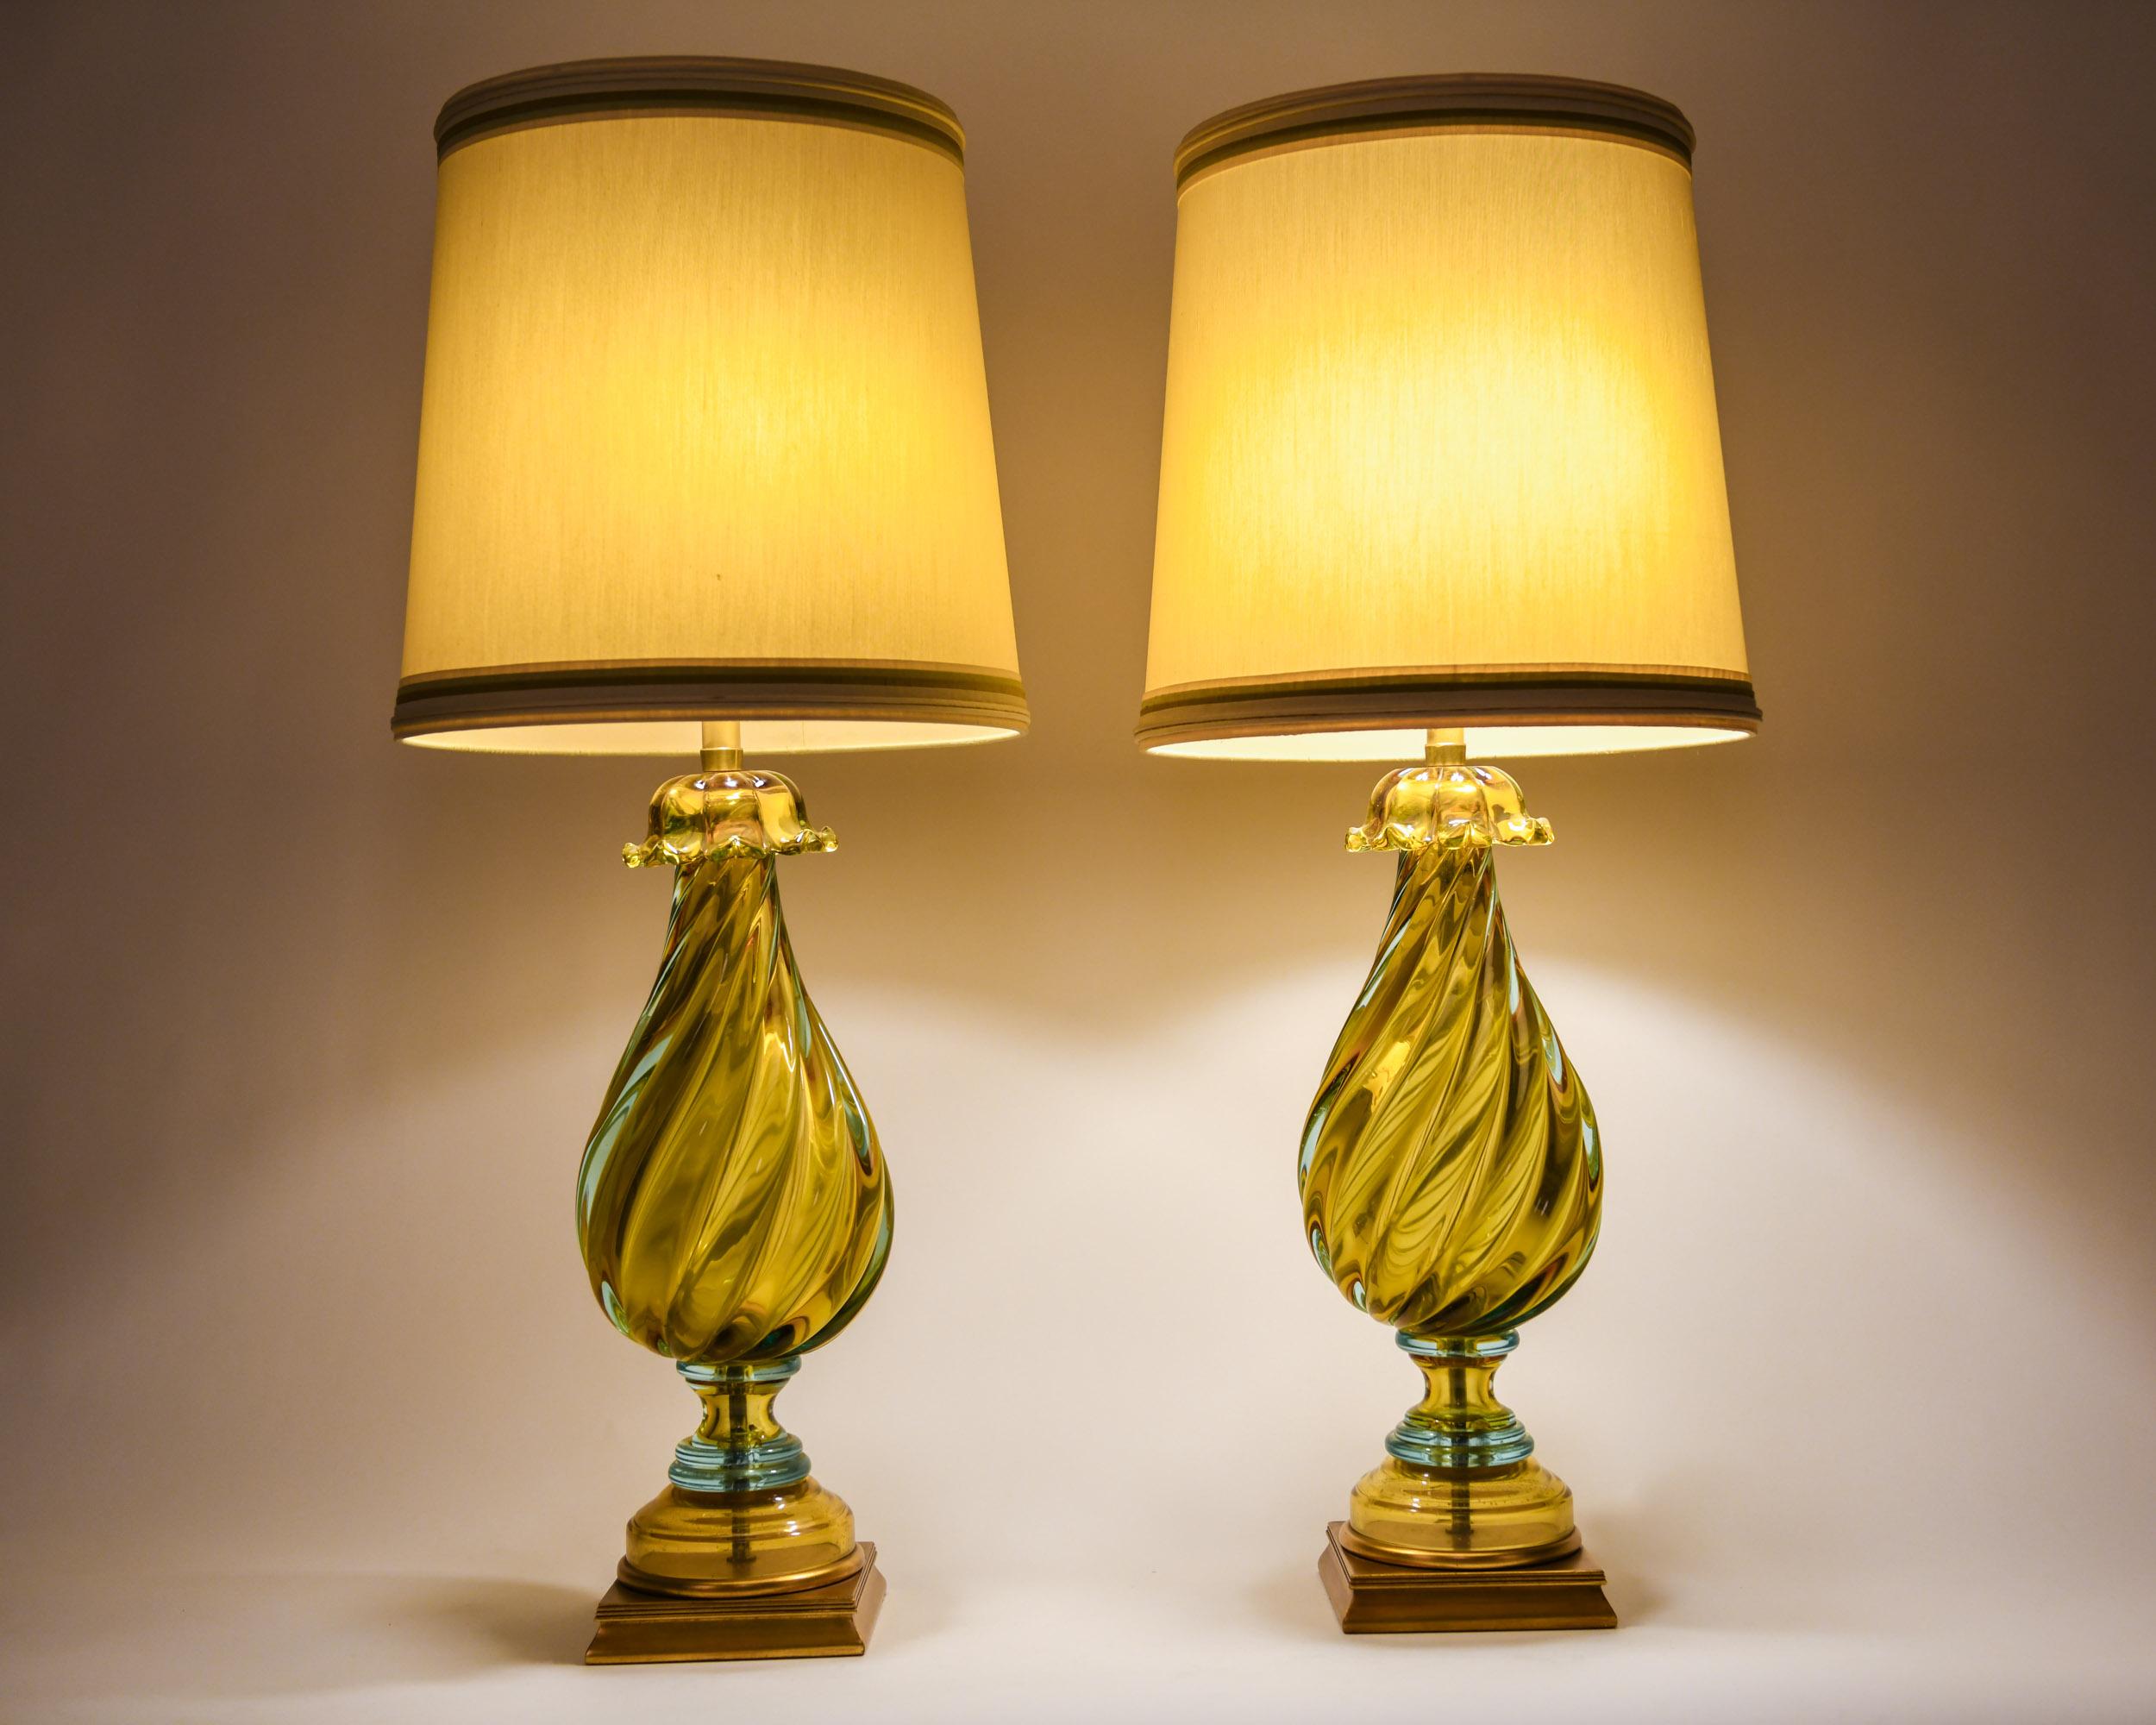 Early 20th century European art glass pair of table lamps with giltwood base. Each lamp is in excellent vintage working condition. Minor wear consistent with age or use. Maker's mark signed on harp. Measures: Each lamp measure about 38 inches from